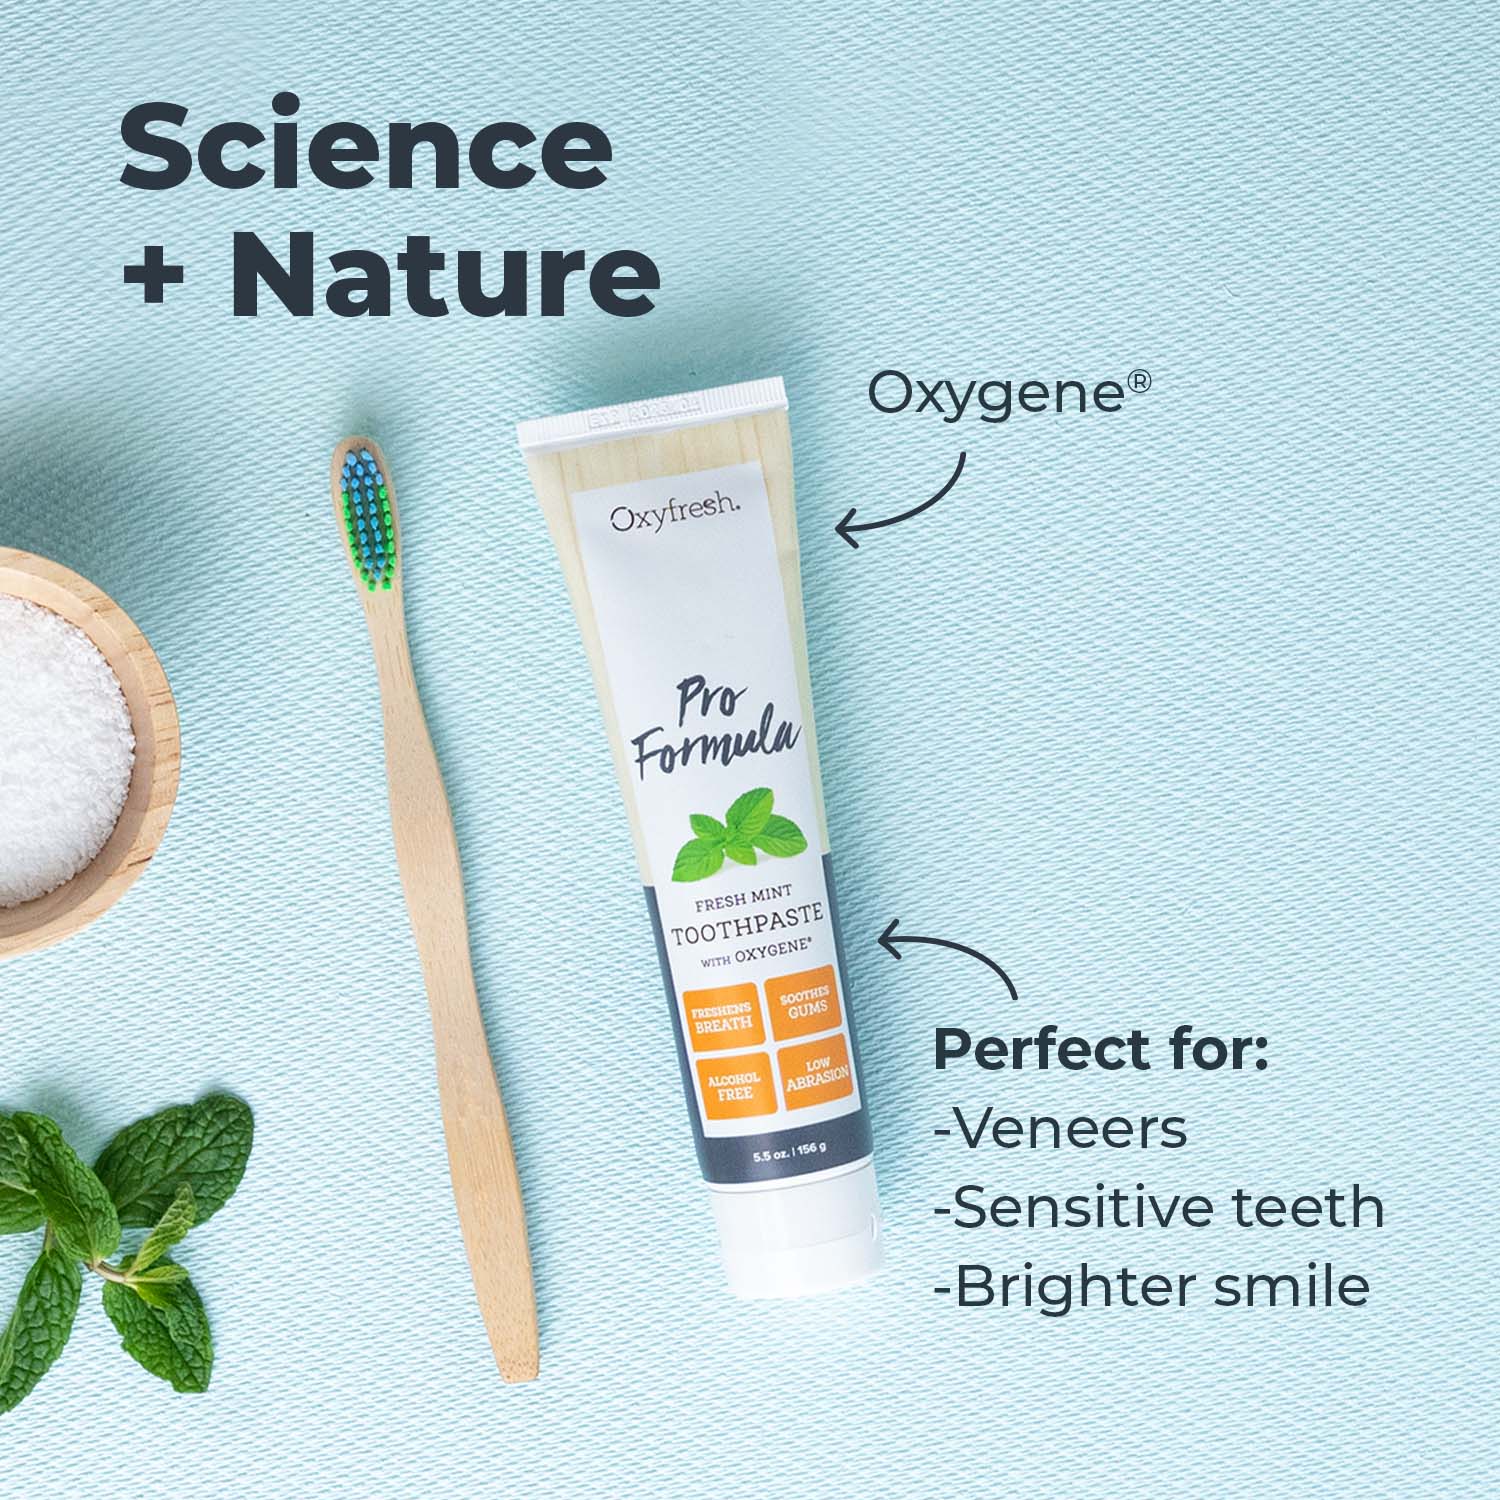 oxyfresh-pro-formula-freshmint-toothpaste-science-and-nature-perfect-for-veneers-sensitive-teeth-and-brighter-smile